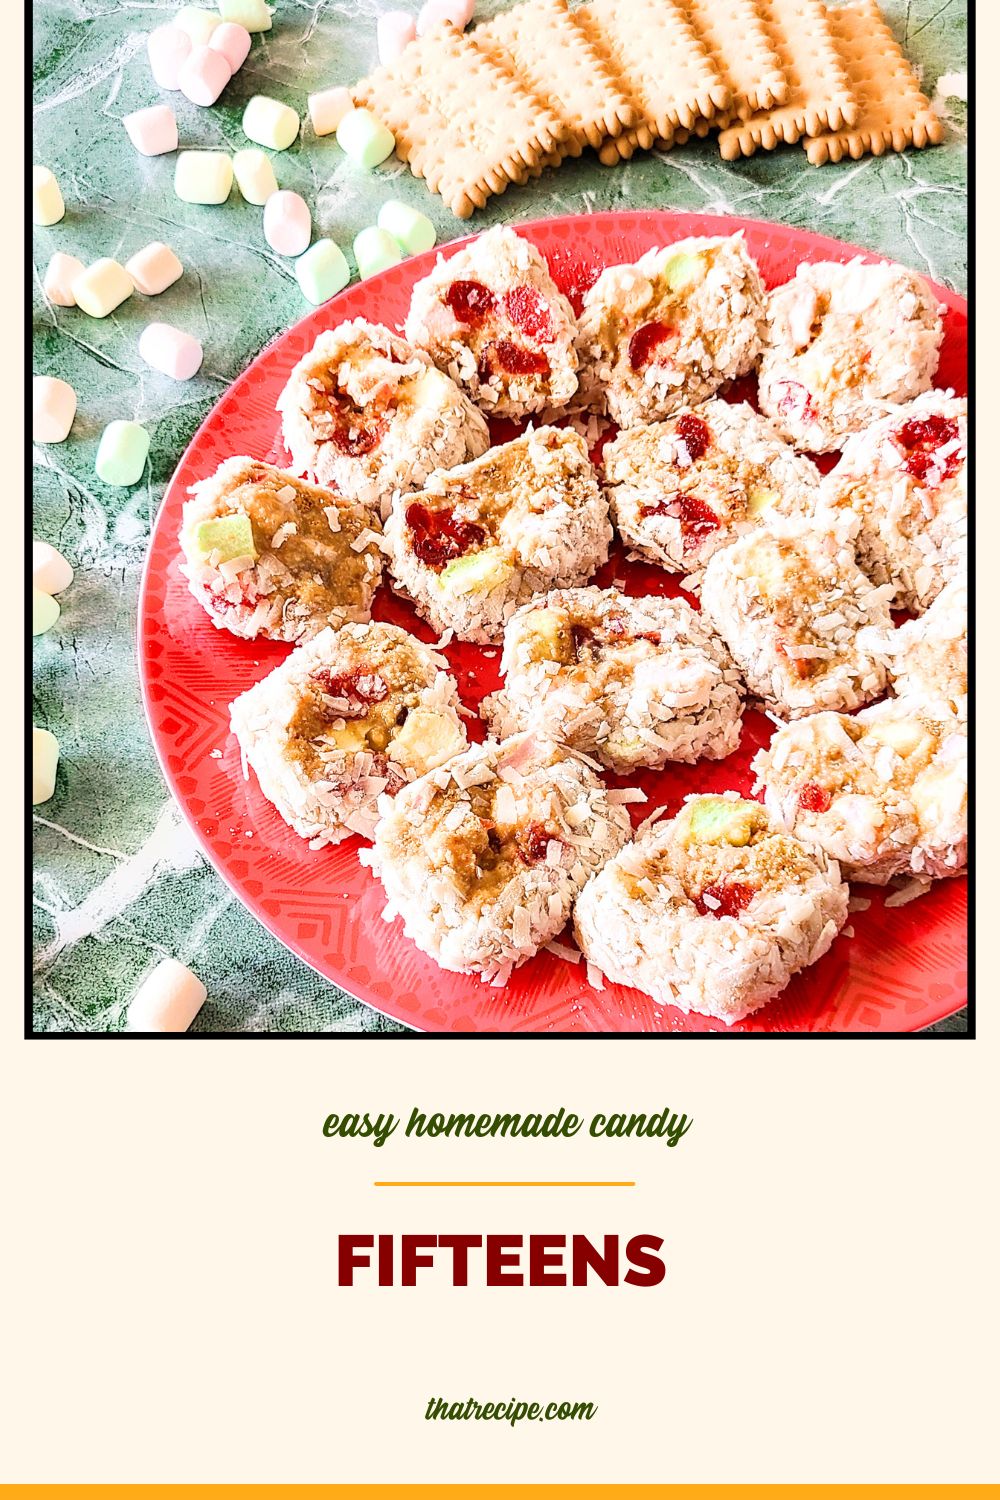 plate of sliced candy rolls with text overlay "easy homemade candy Fifteens: